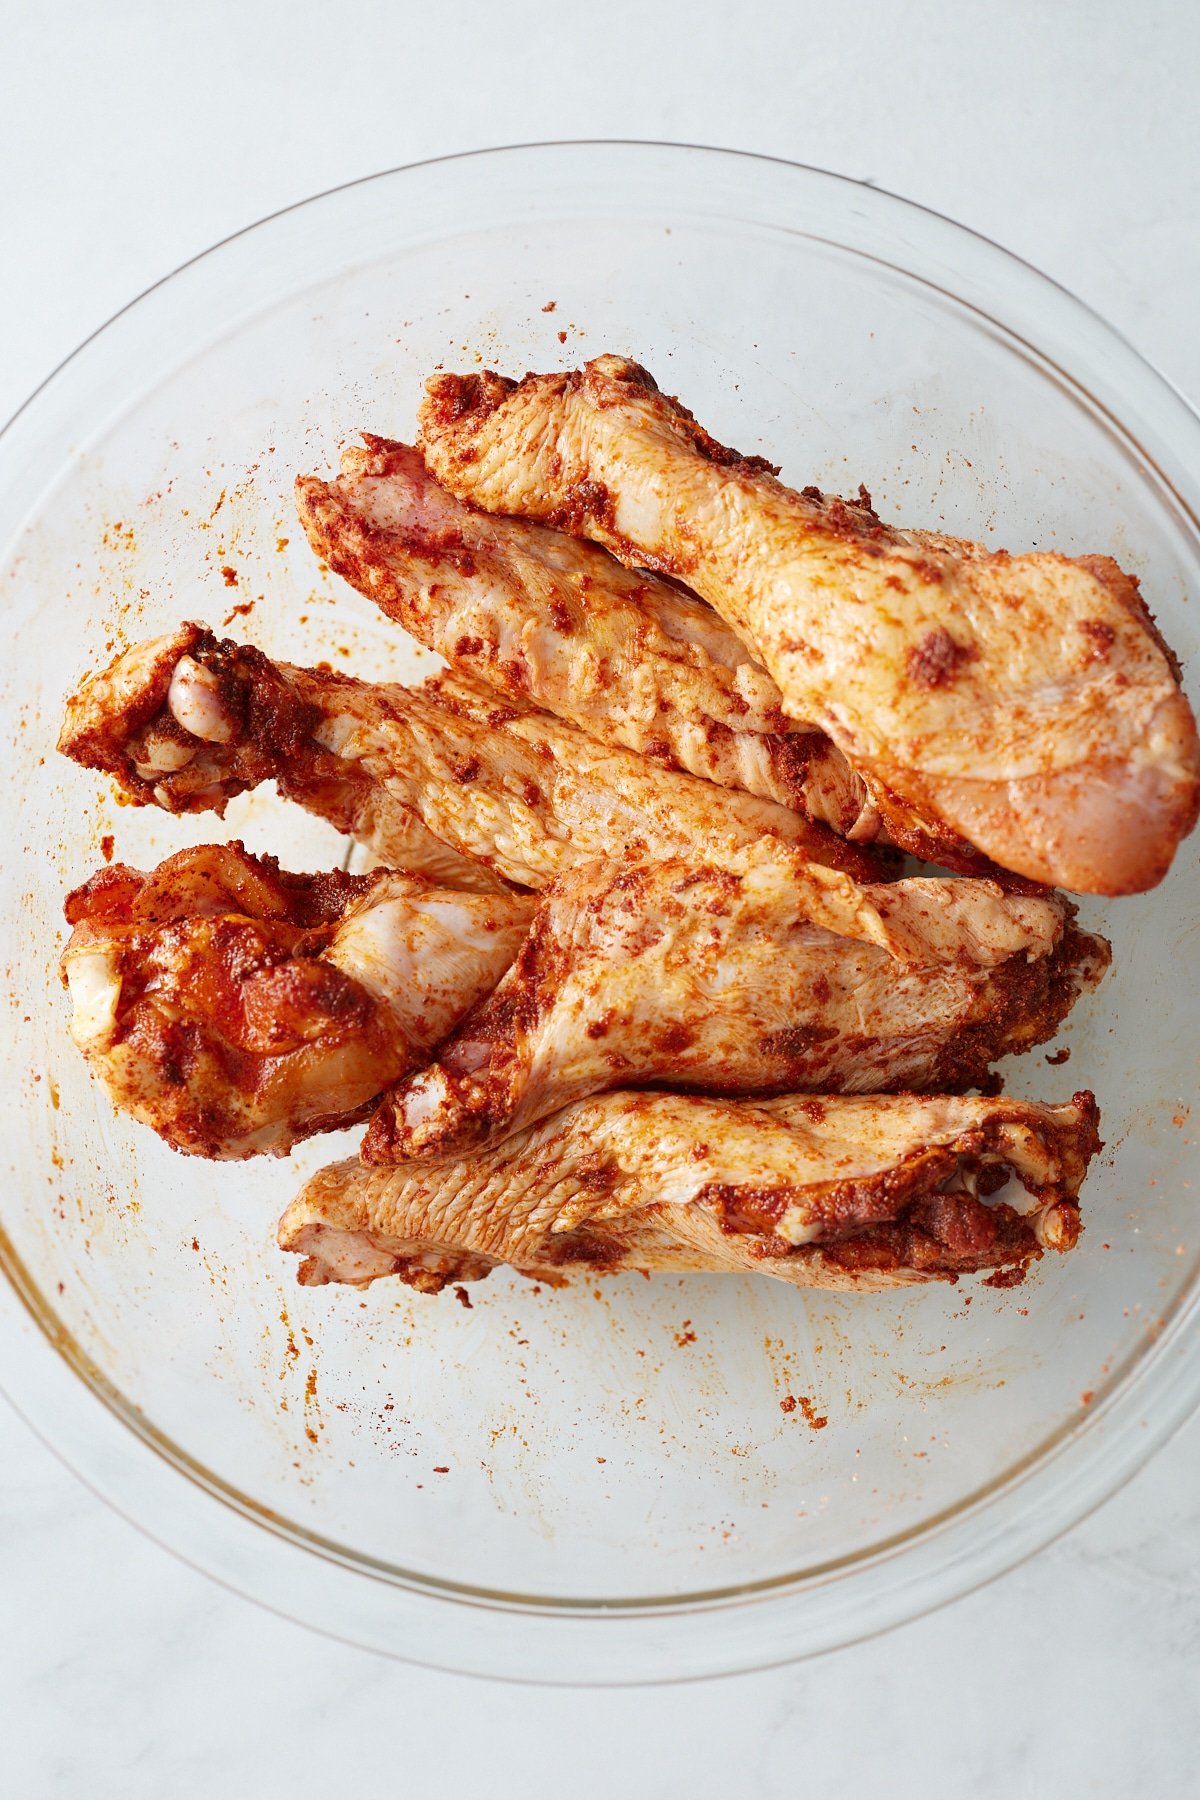 Turkey wings in a bowl rubbed with the seasonings.